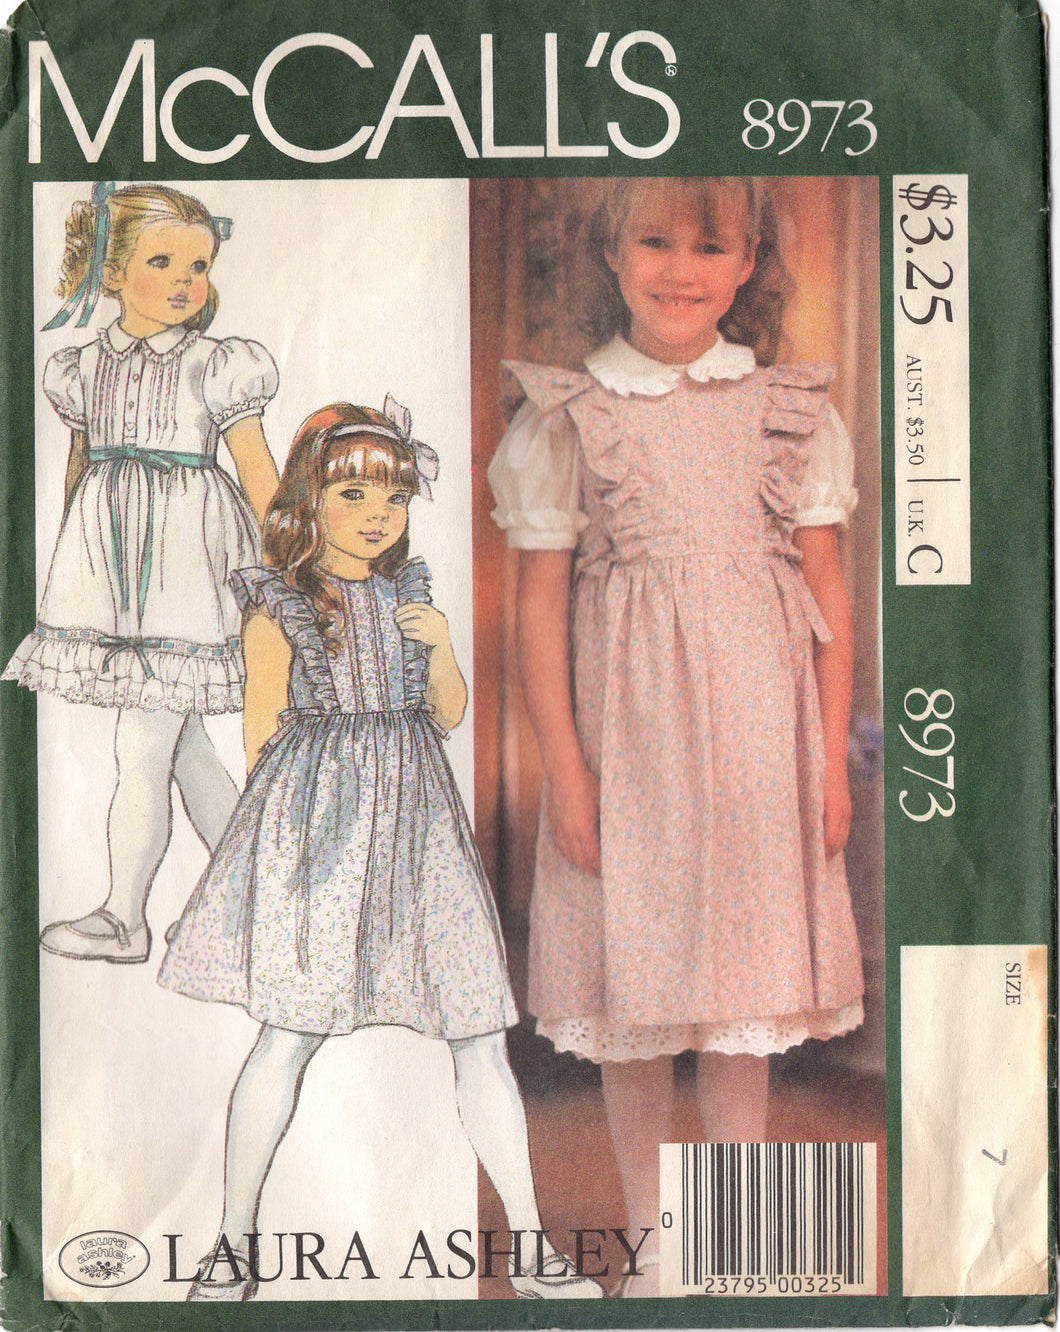 1980's McCall's Laura Ashley Child and Girl's Jumper, Blouse, and Petticoat or Skirt - Size 7 - Breast 26